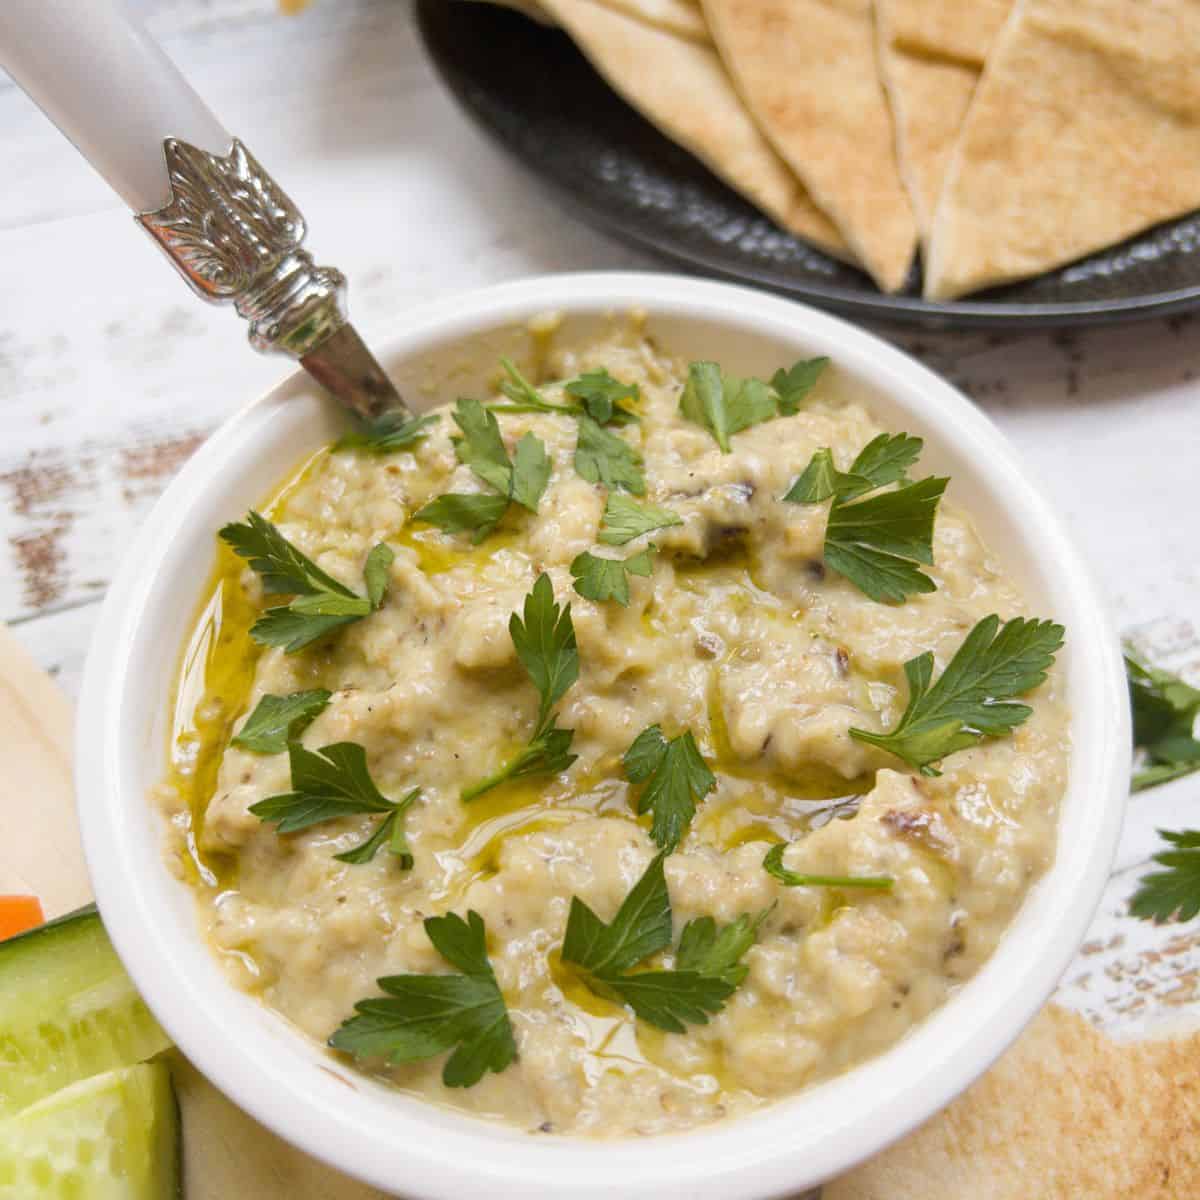 close up picture of baba ganoush in a bowl with some flatbread on the side.